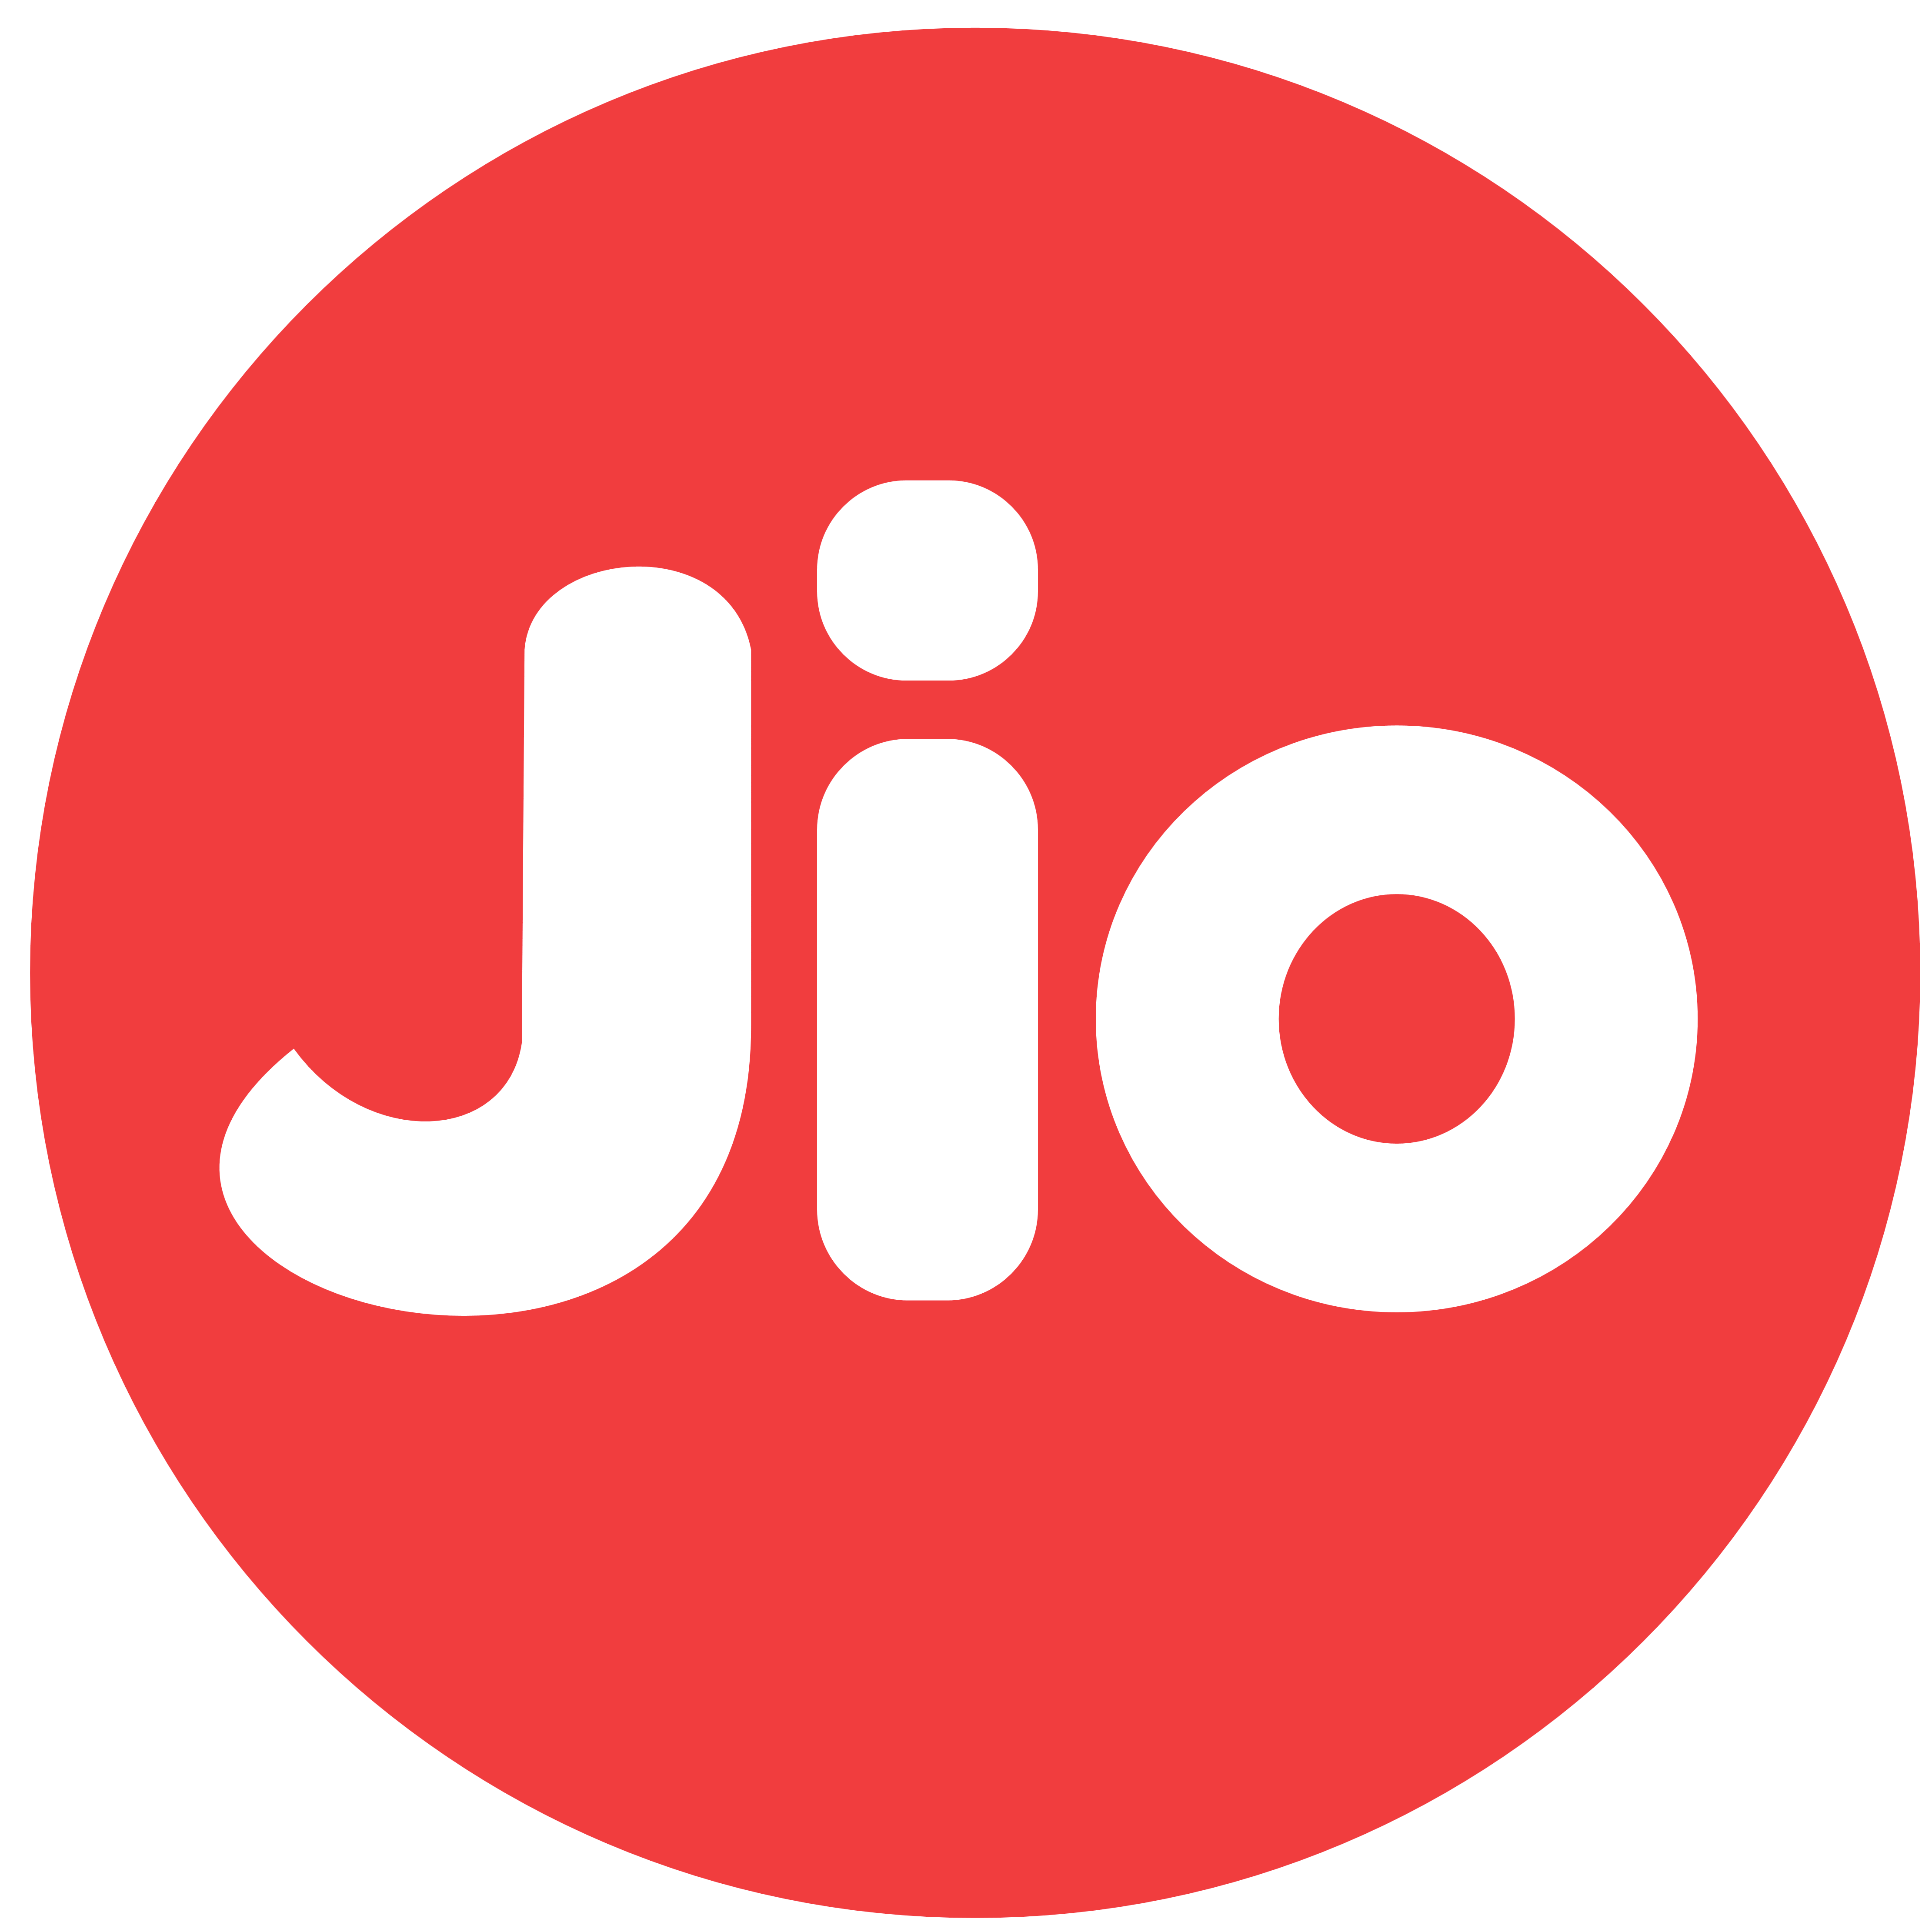 Reliance Jio, from September 5 to December 31, it will be free for all ...